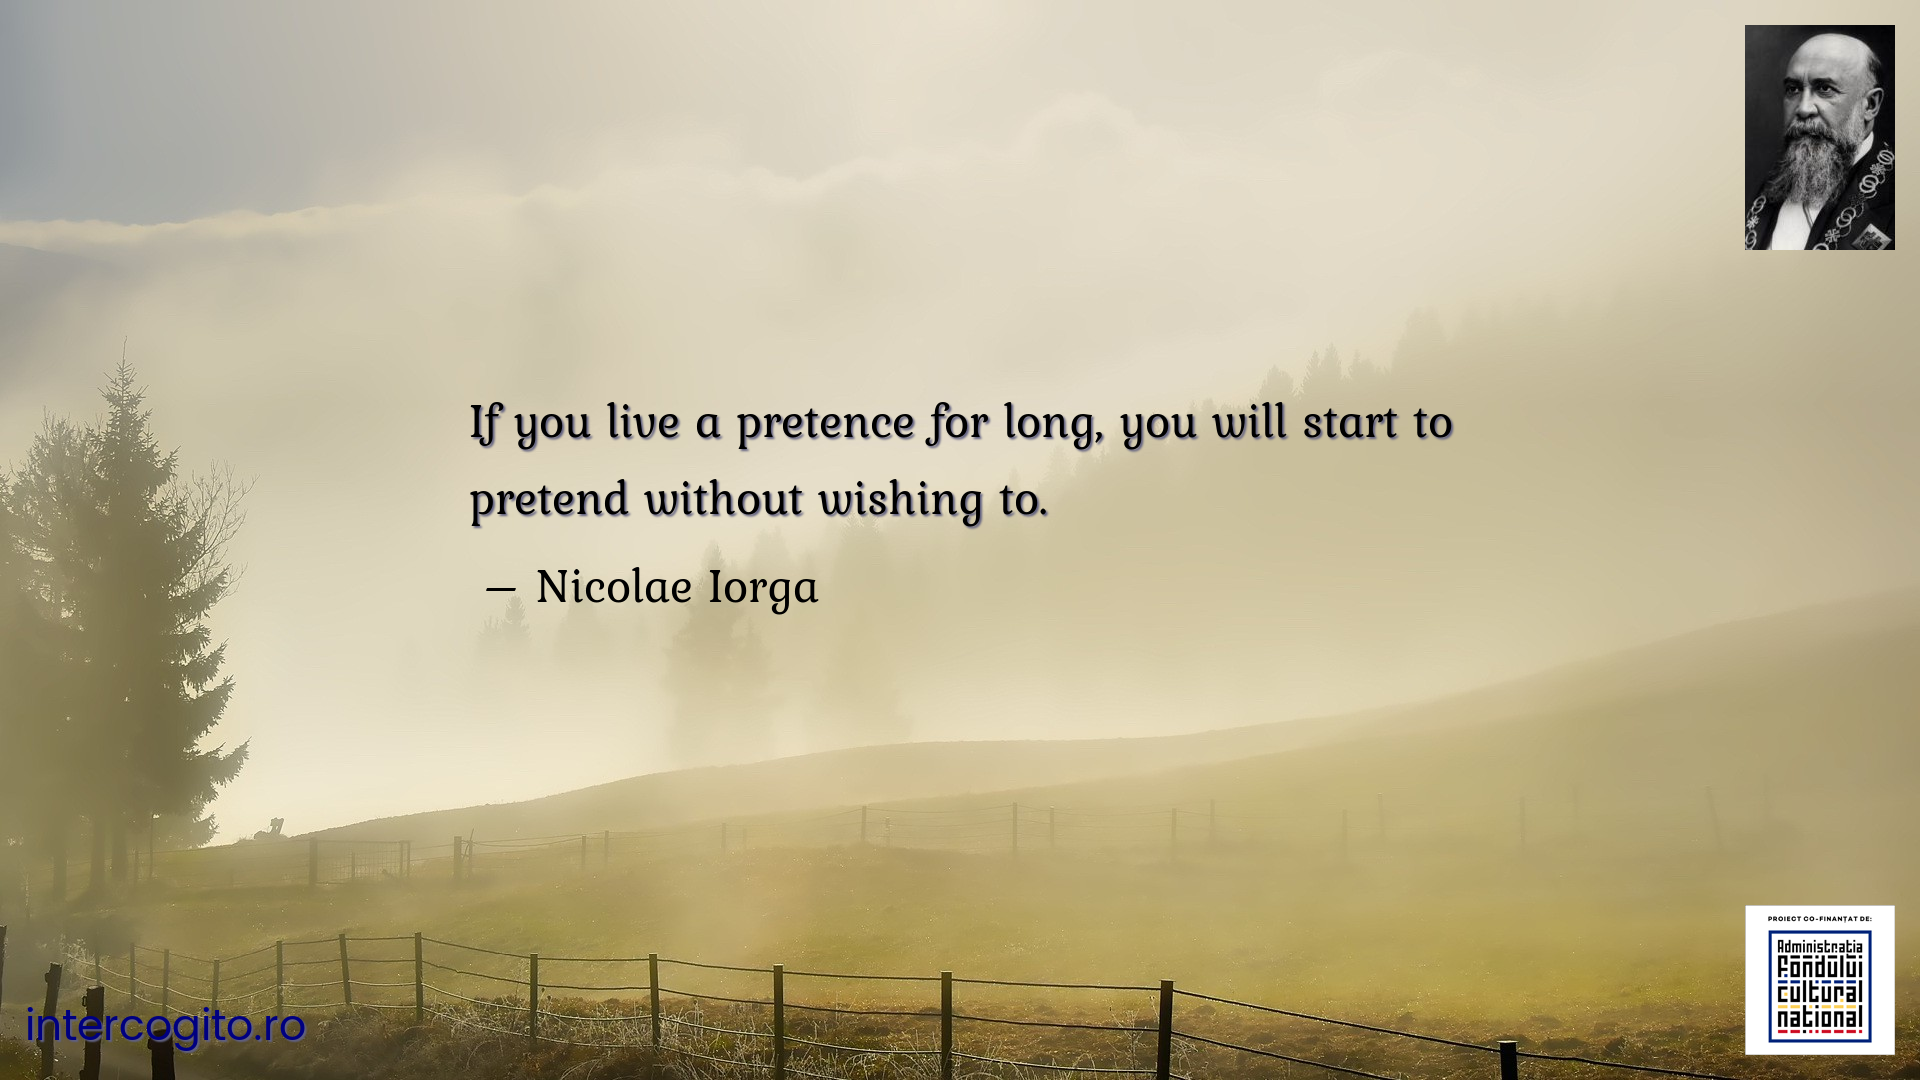 If you live a pretence for long, you will start to pretend without wishing to.